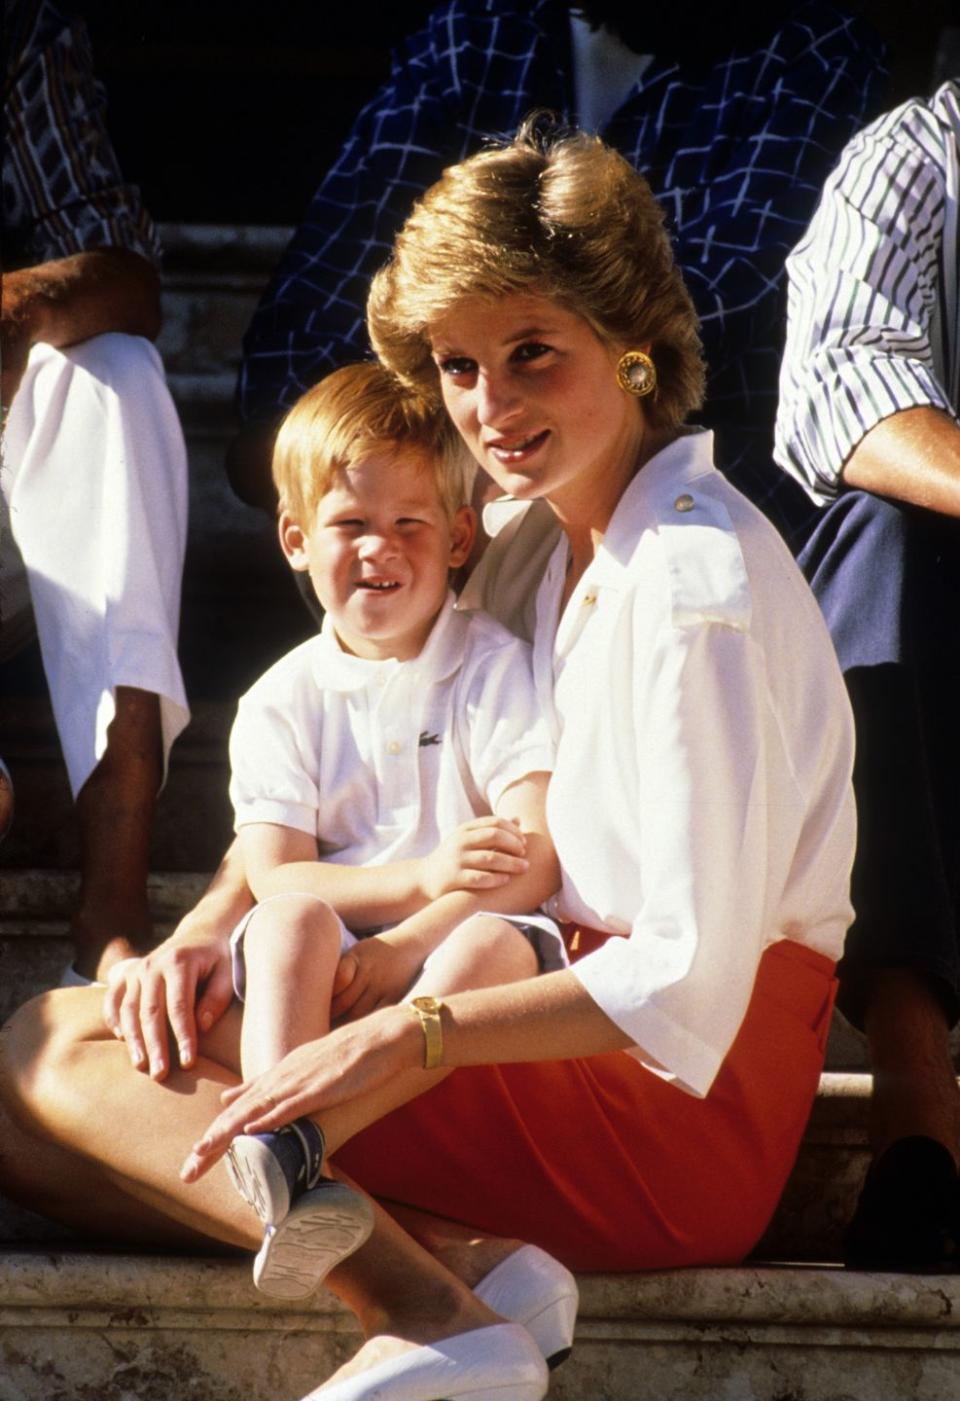 palma, majorca august 13 prince harry sits on the lap of his mother, diana, princess of wales, whilst on holiday in majorca on august 13, 1988 in palma, majorca photo by anwar husseingetty images